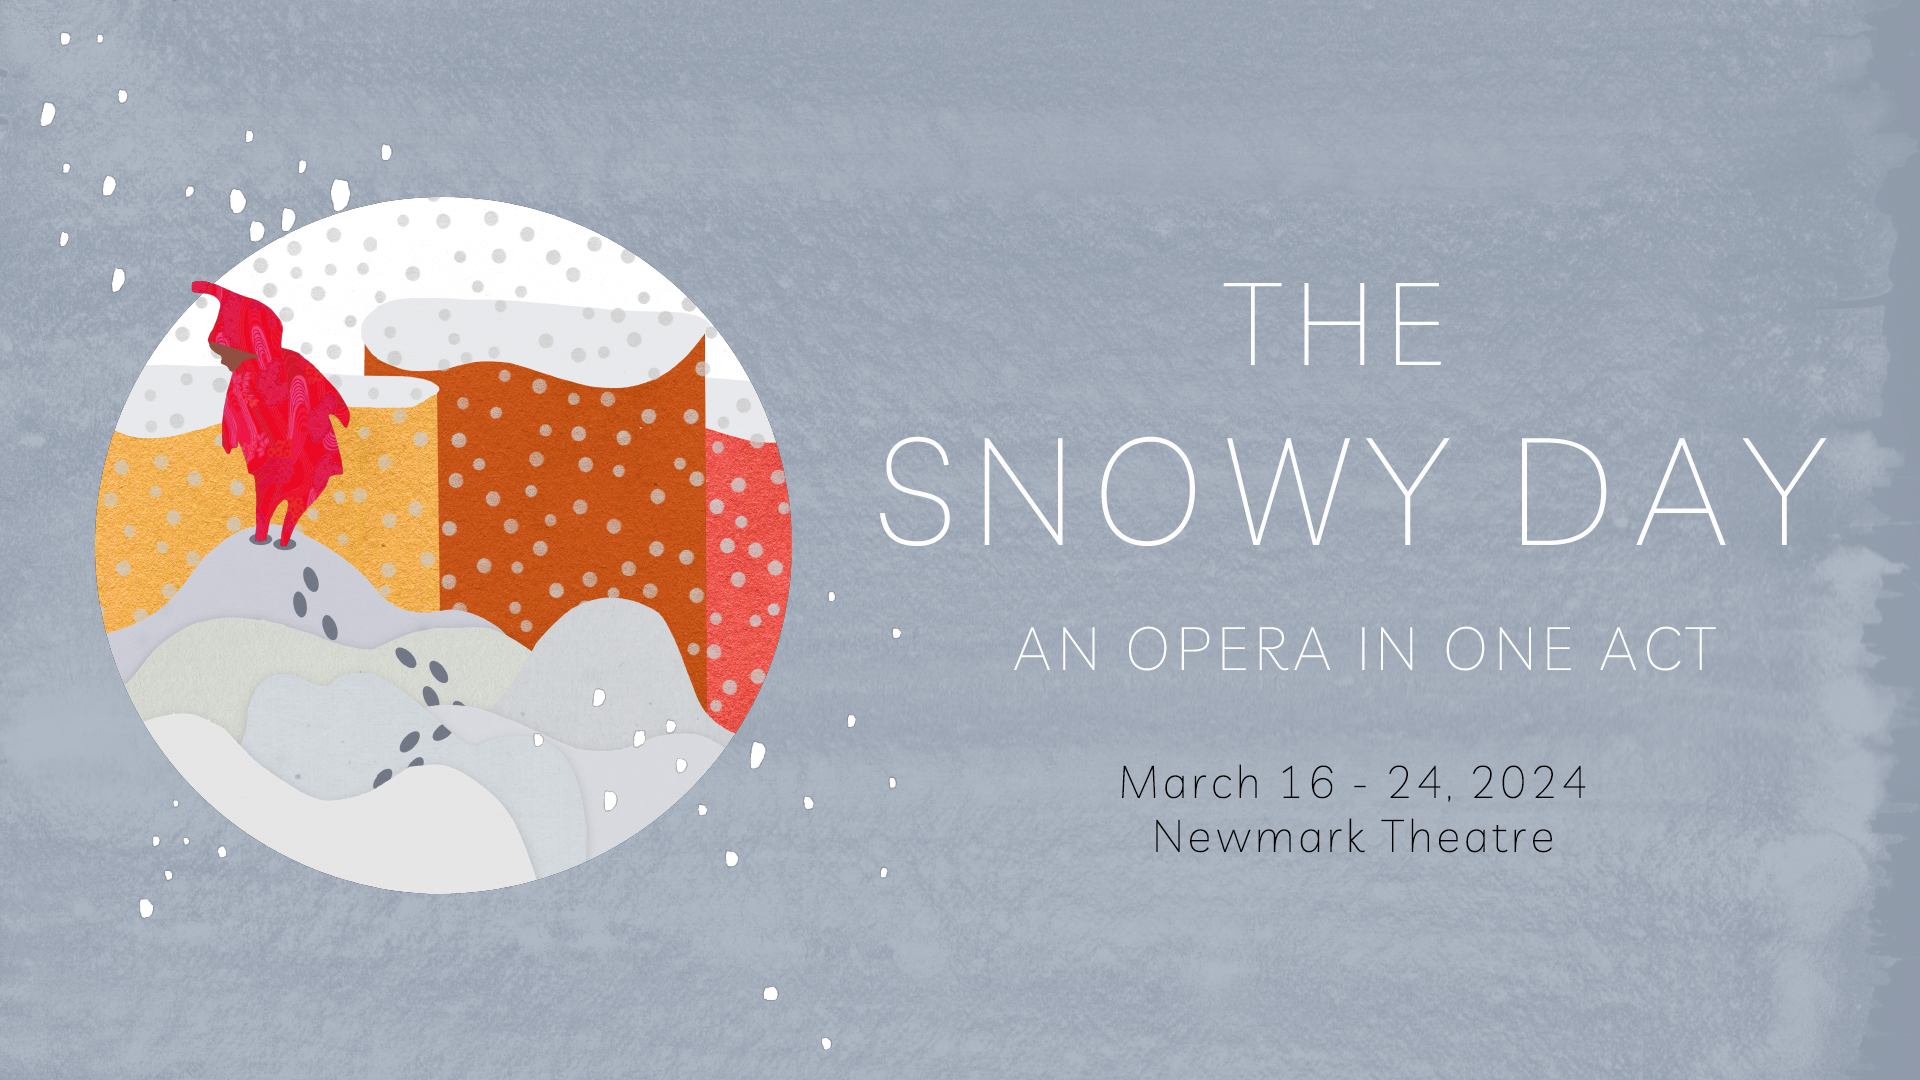 THE SNOWY DAY | MARCH 16-24